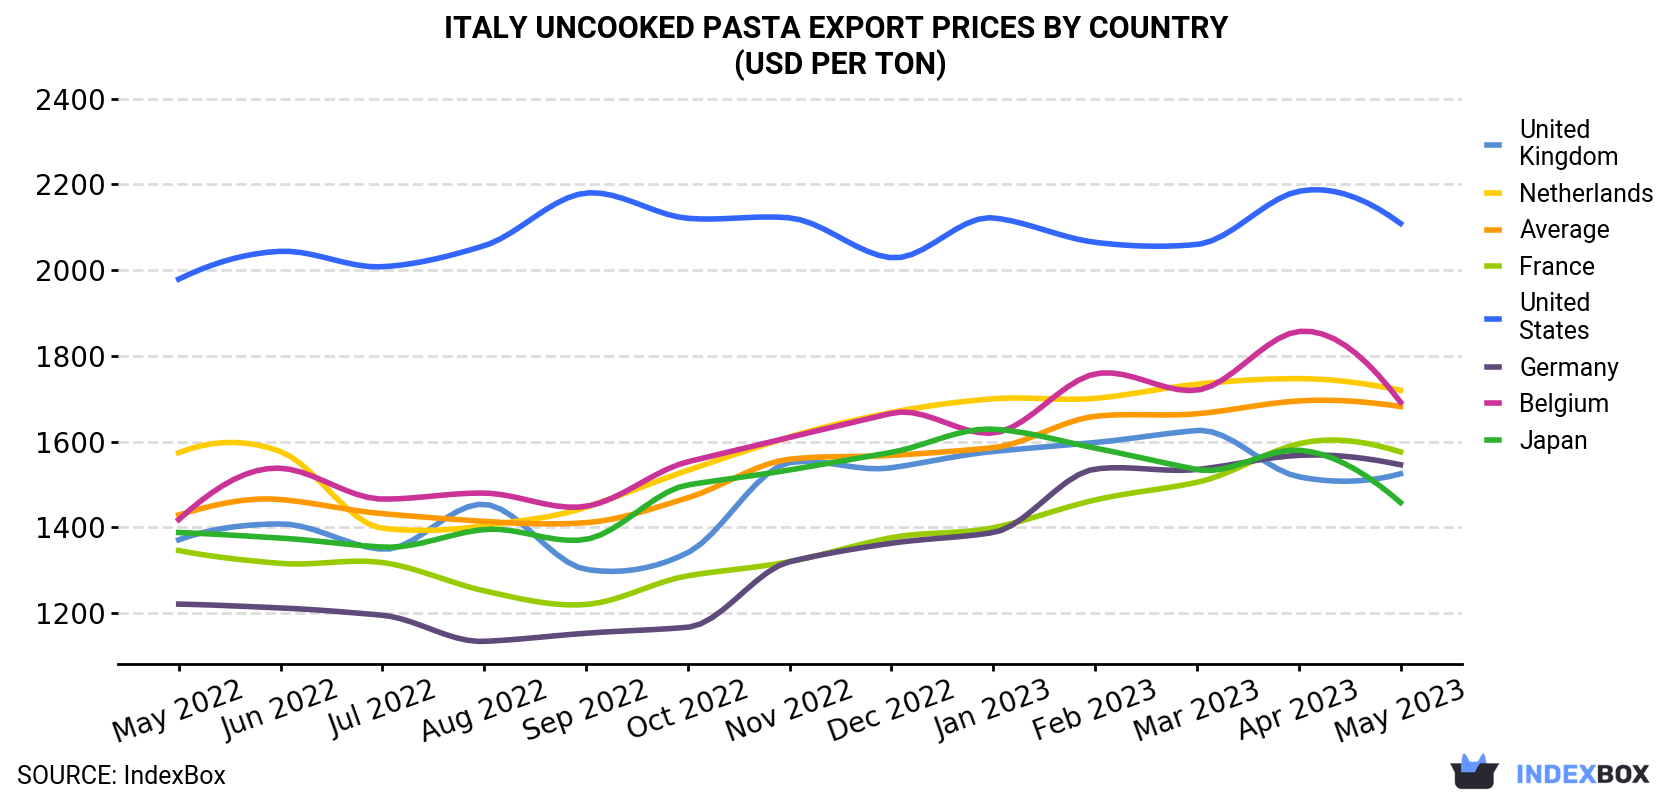 Italy Uncooked Pasta Export Prices By Country (USD Per Ton)